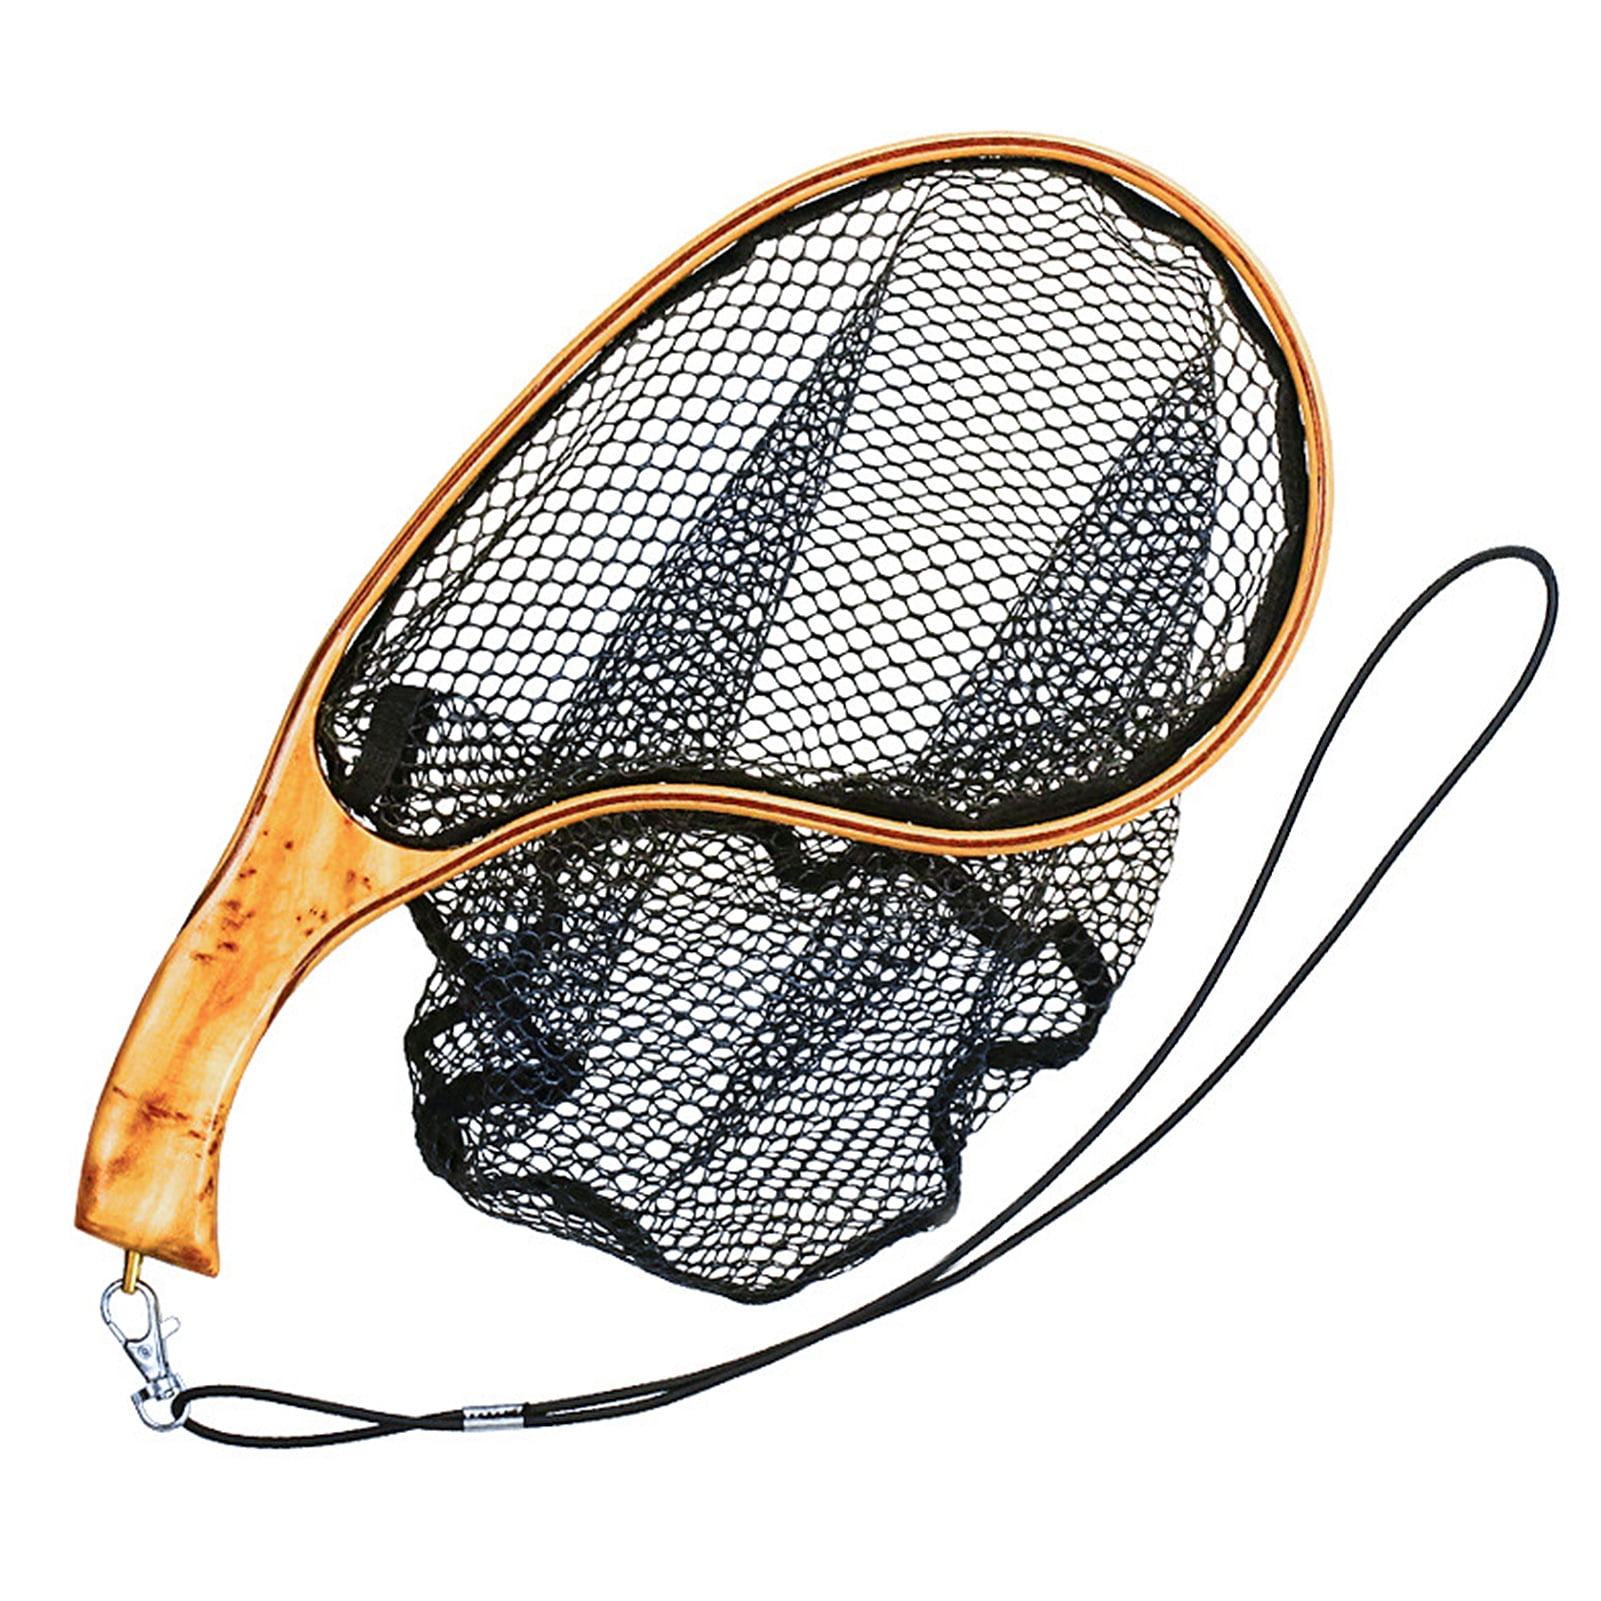 Zzistar Fly Fishing Net Mesh, Soft Rubber Wood Handle Rubber